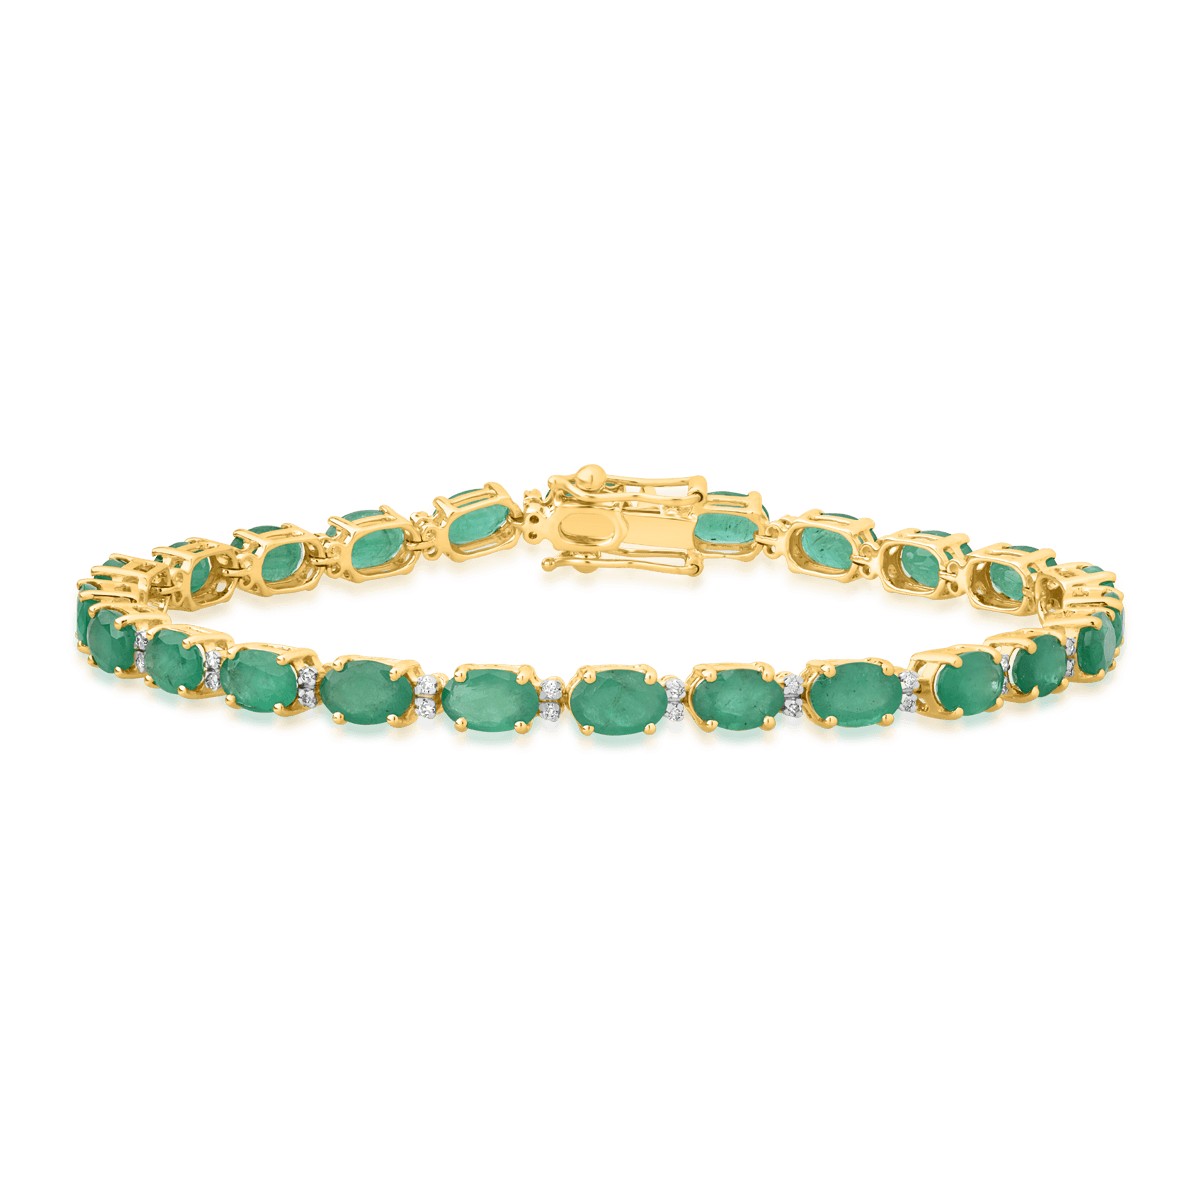 14K yellow gold tennis bracelet with 9.66ct emeralds and 0.22ct diamonds